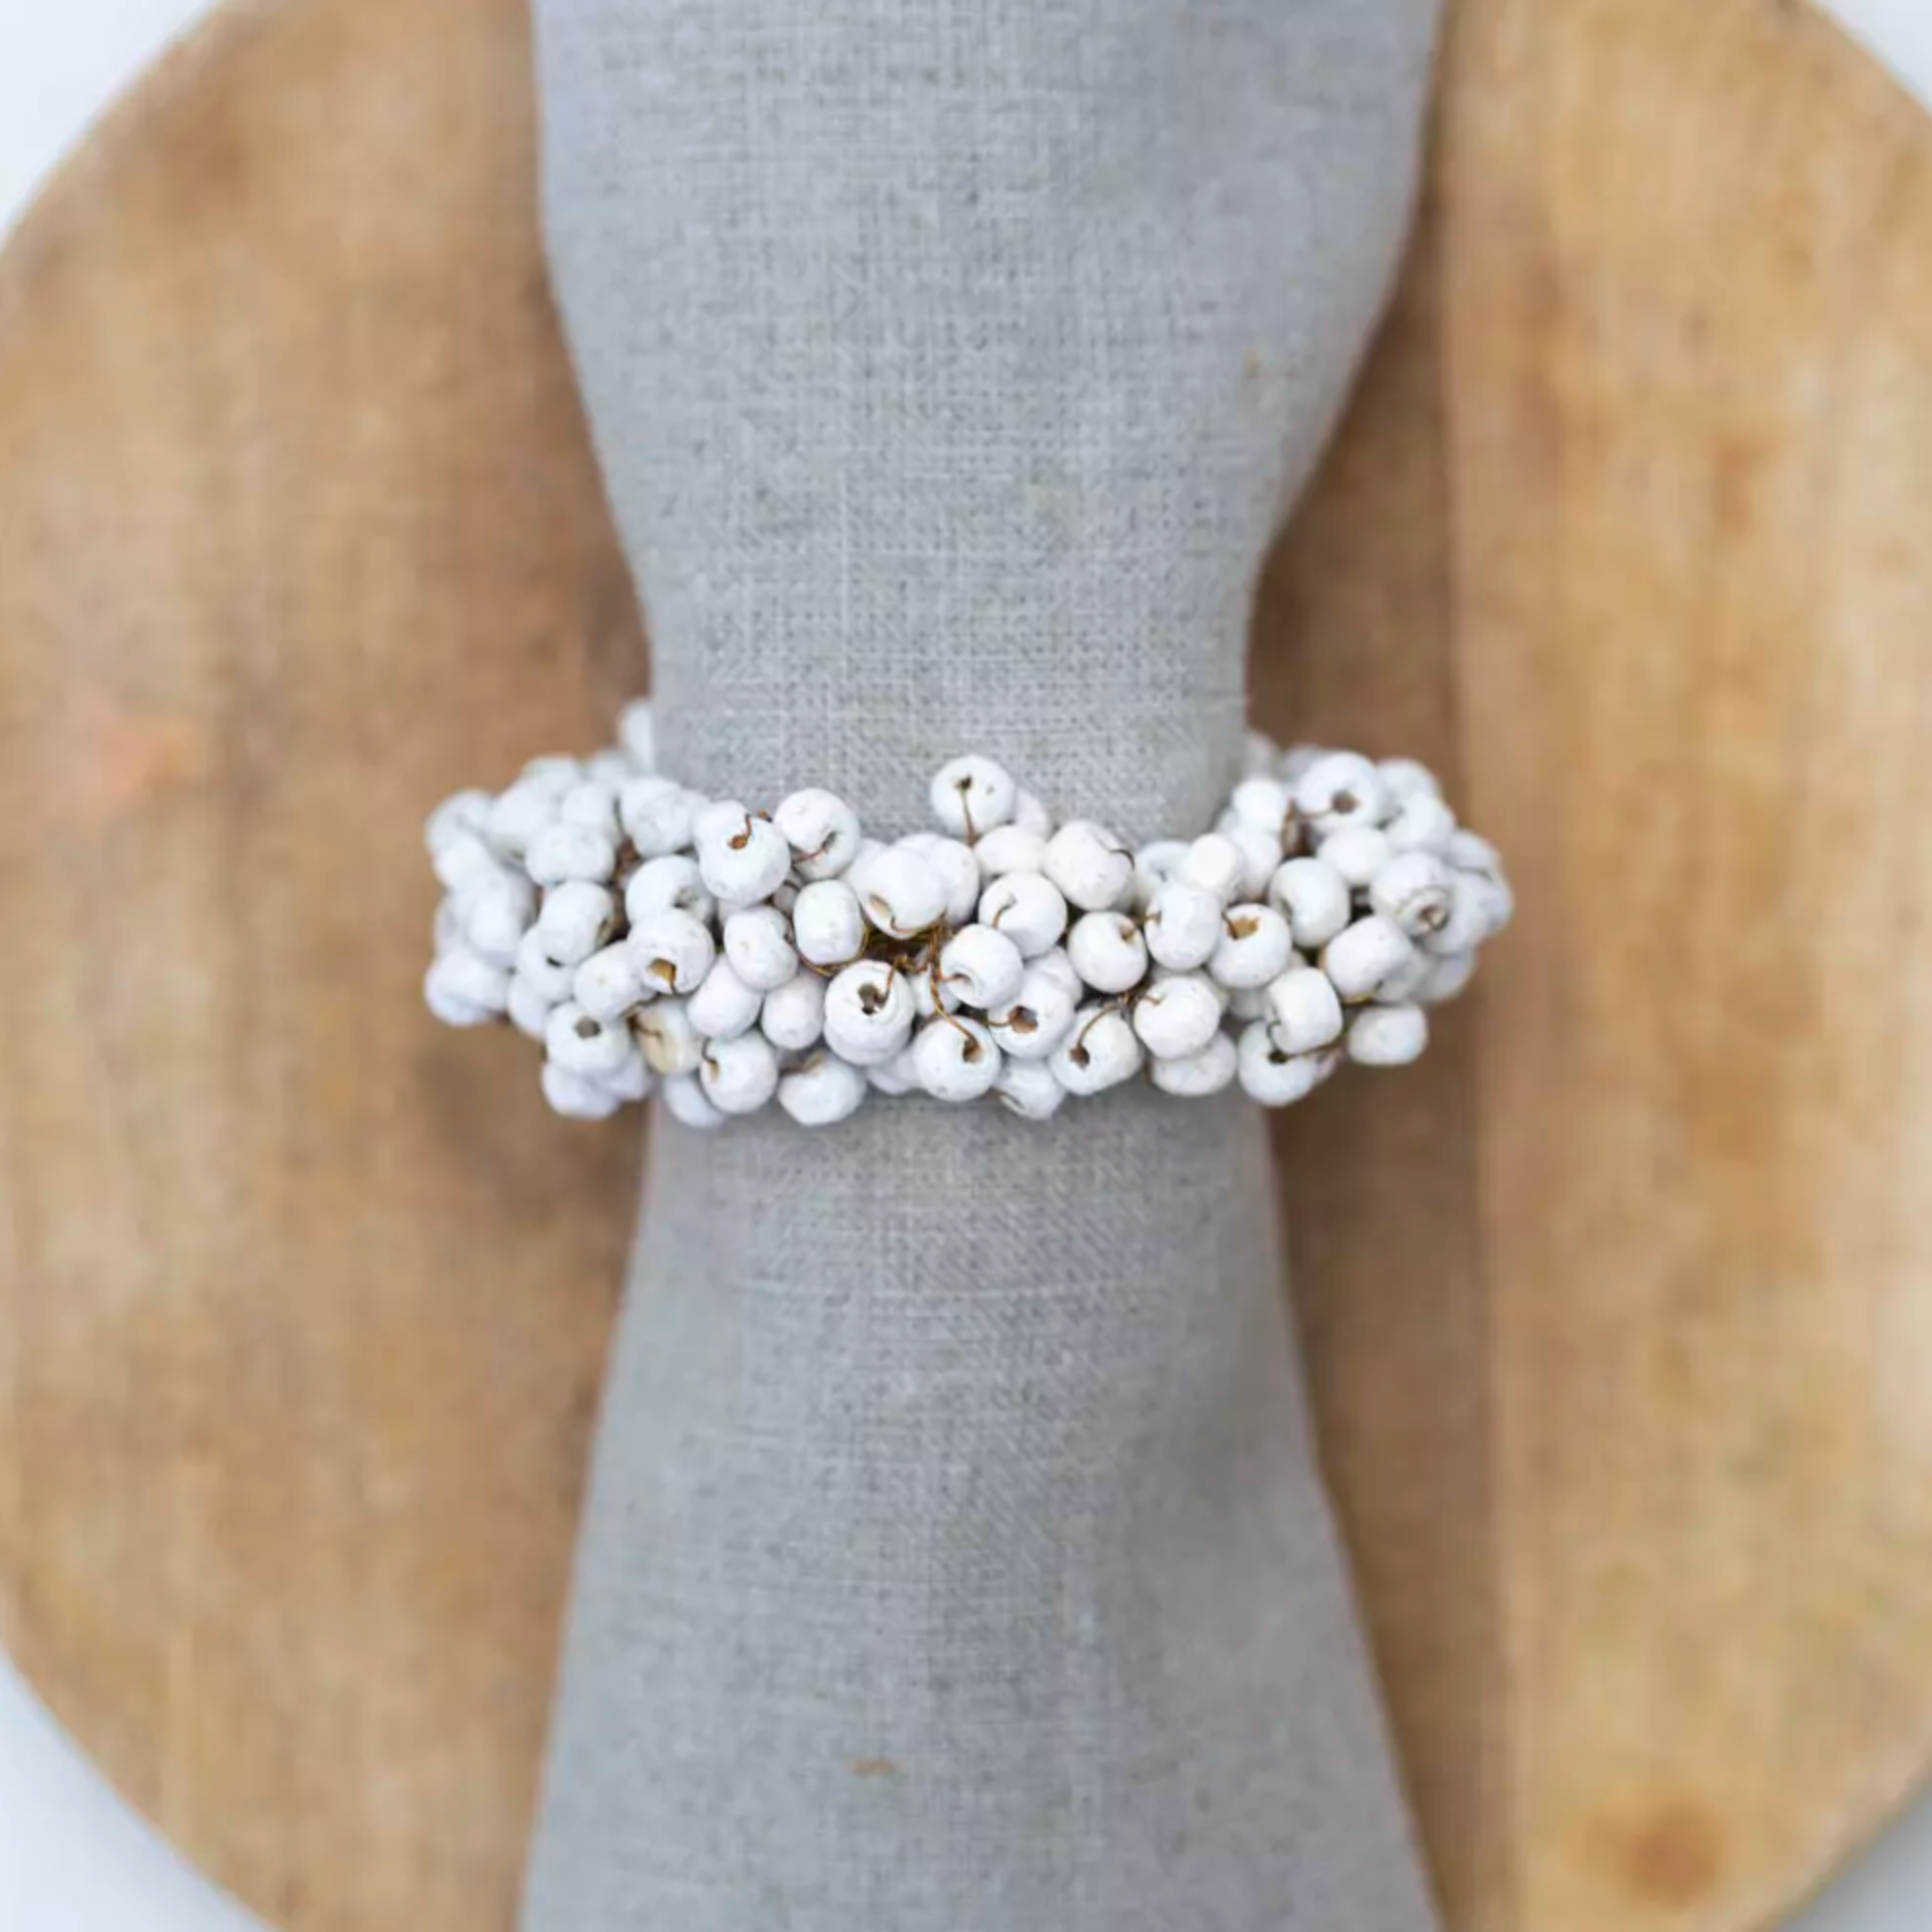 Wooden Napkin Ring with White Berries on a wooden plate.